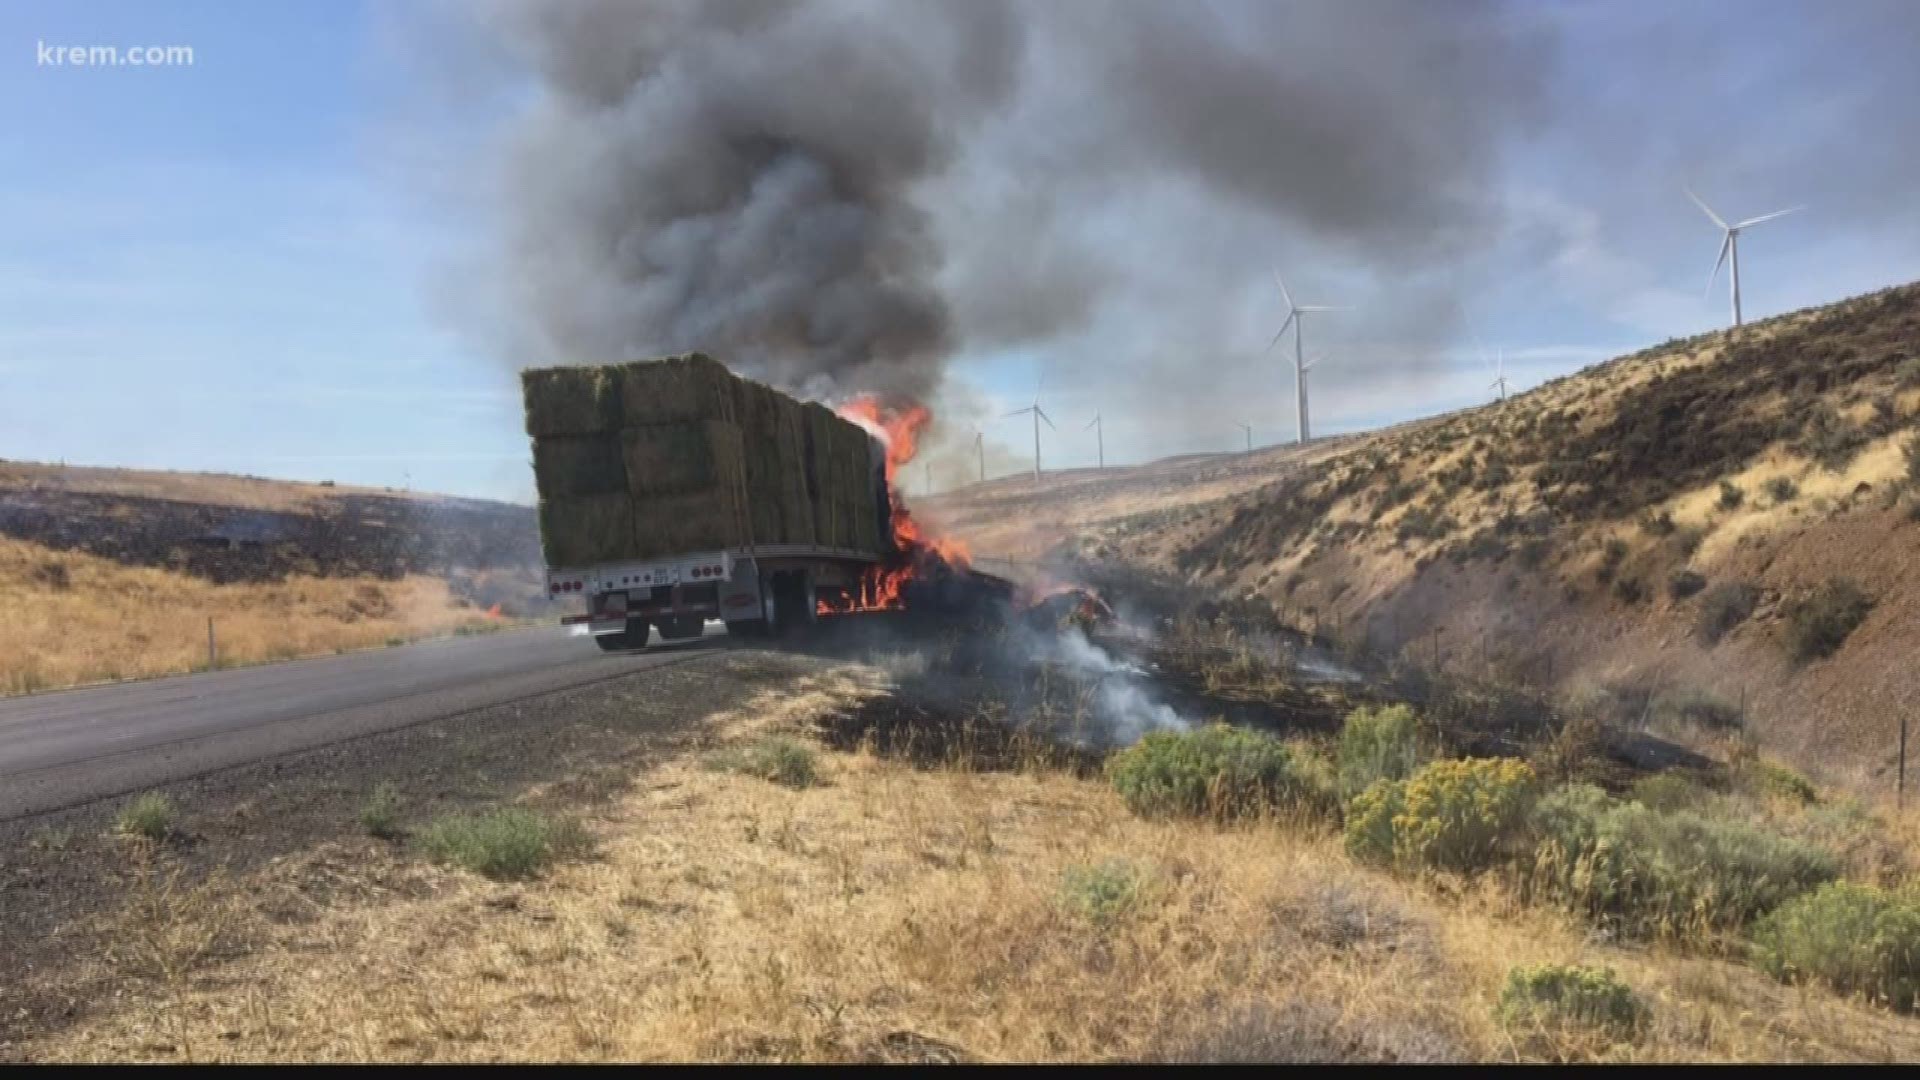 The fire started due to a hay truck catching fire before moving to nearby brush.